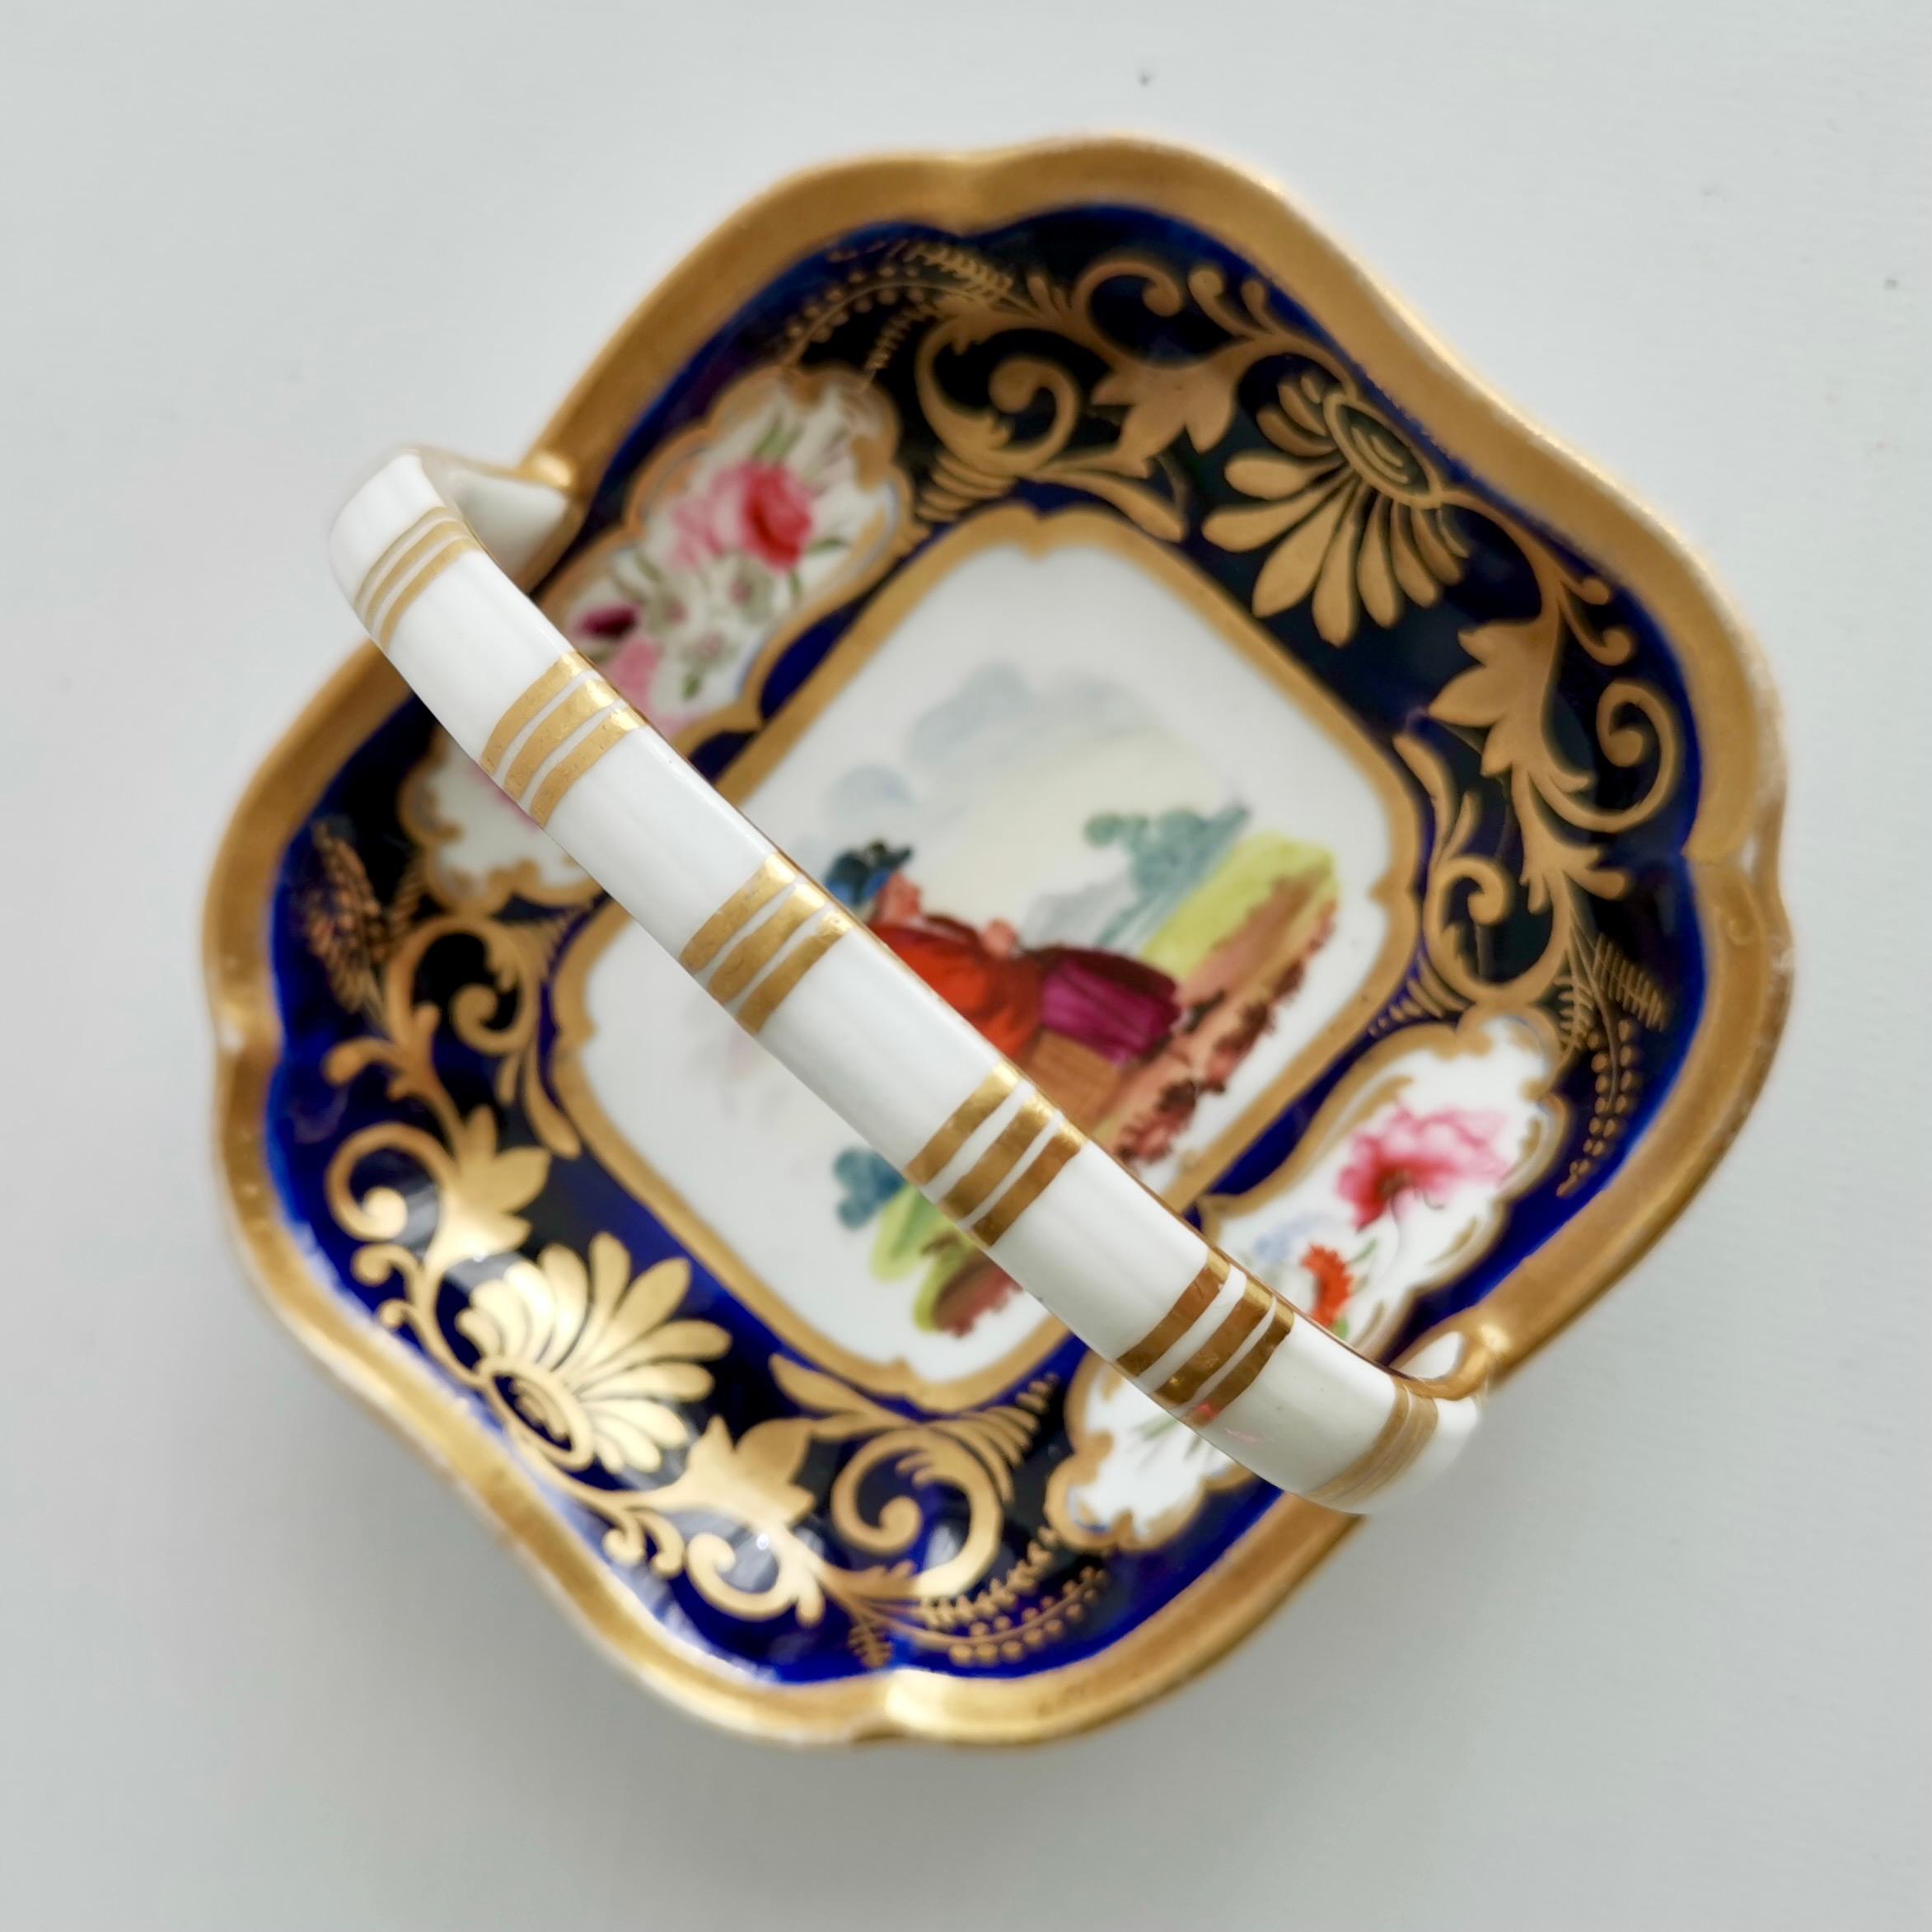 This is a gorgeous little porcelain basket or trinket dish made in England in around 1820. We don't know who made this basket: it could be James & Ralph Clews, who were known to paint these rustic figures, or Hicks & Meigh, or Ridgway, or frankly